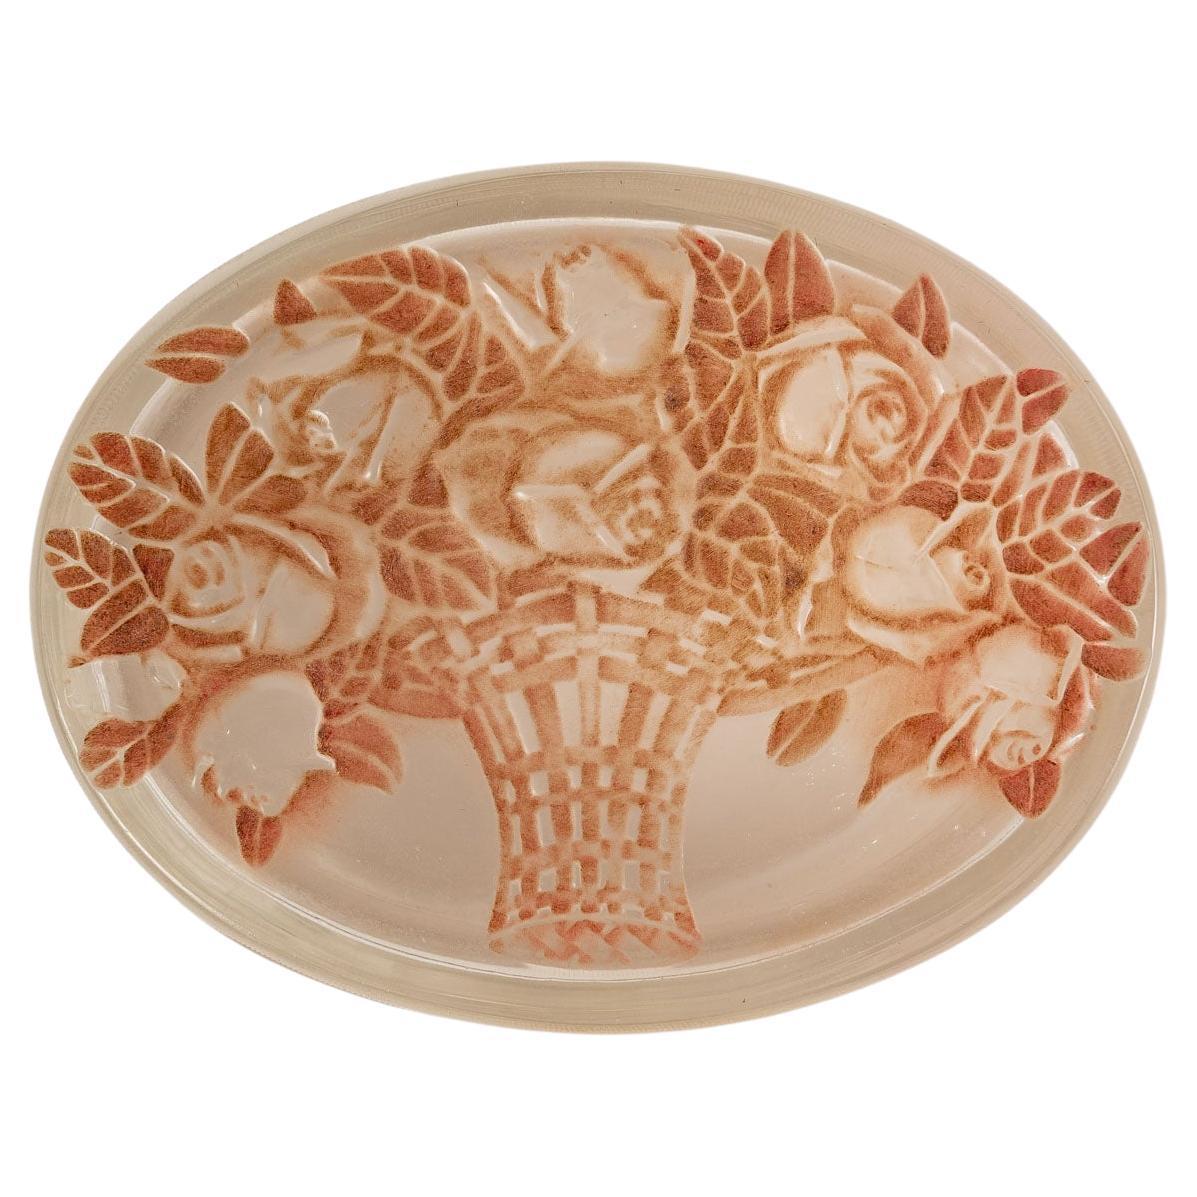 1919 René Lalique, Box Panier De Roses Frosted Glass with Sepia Patina